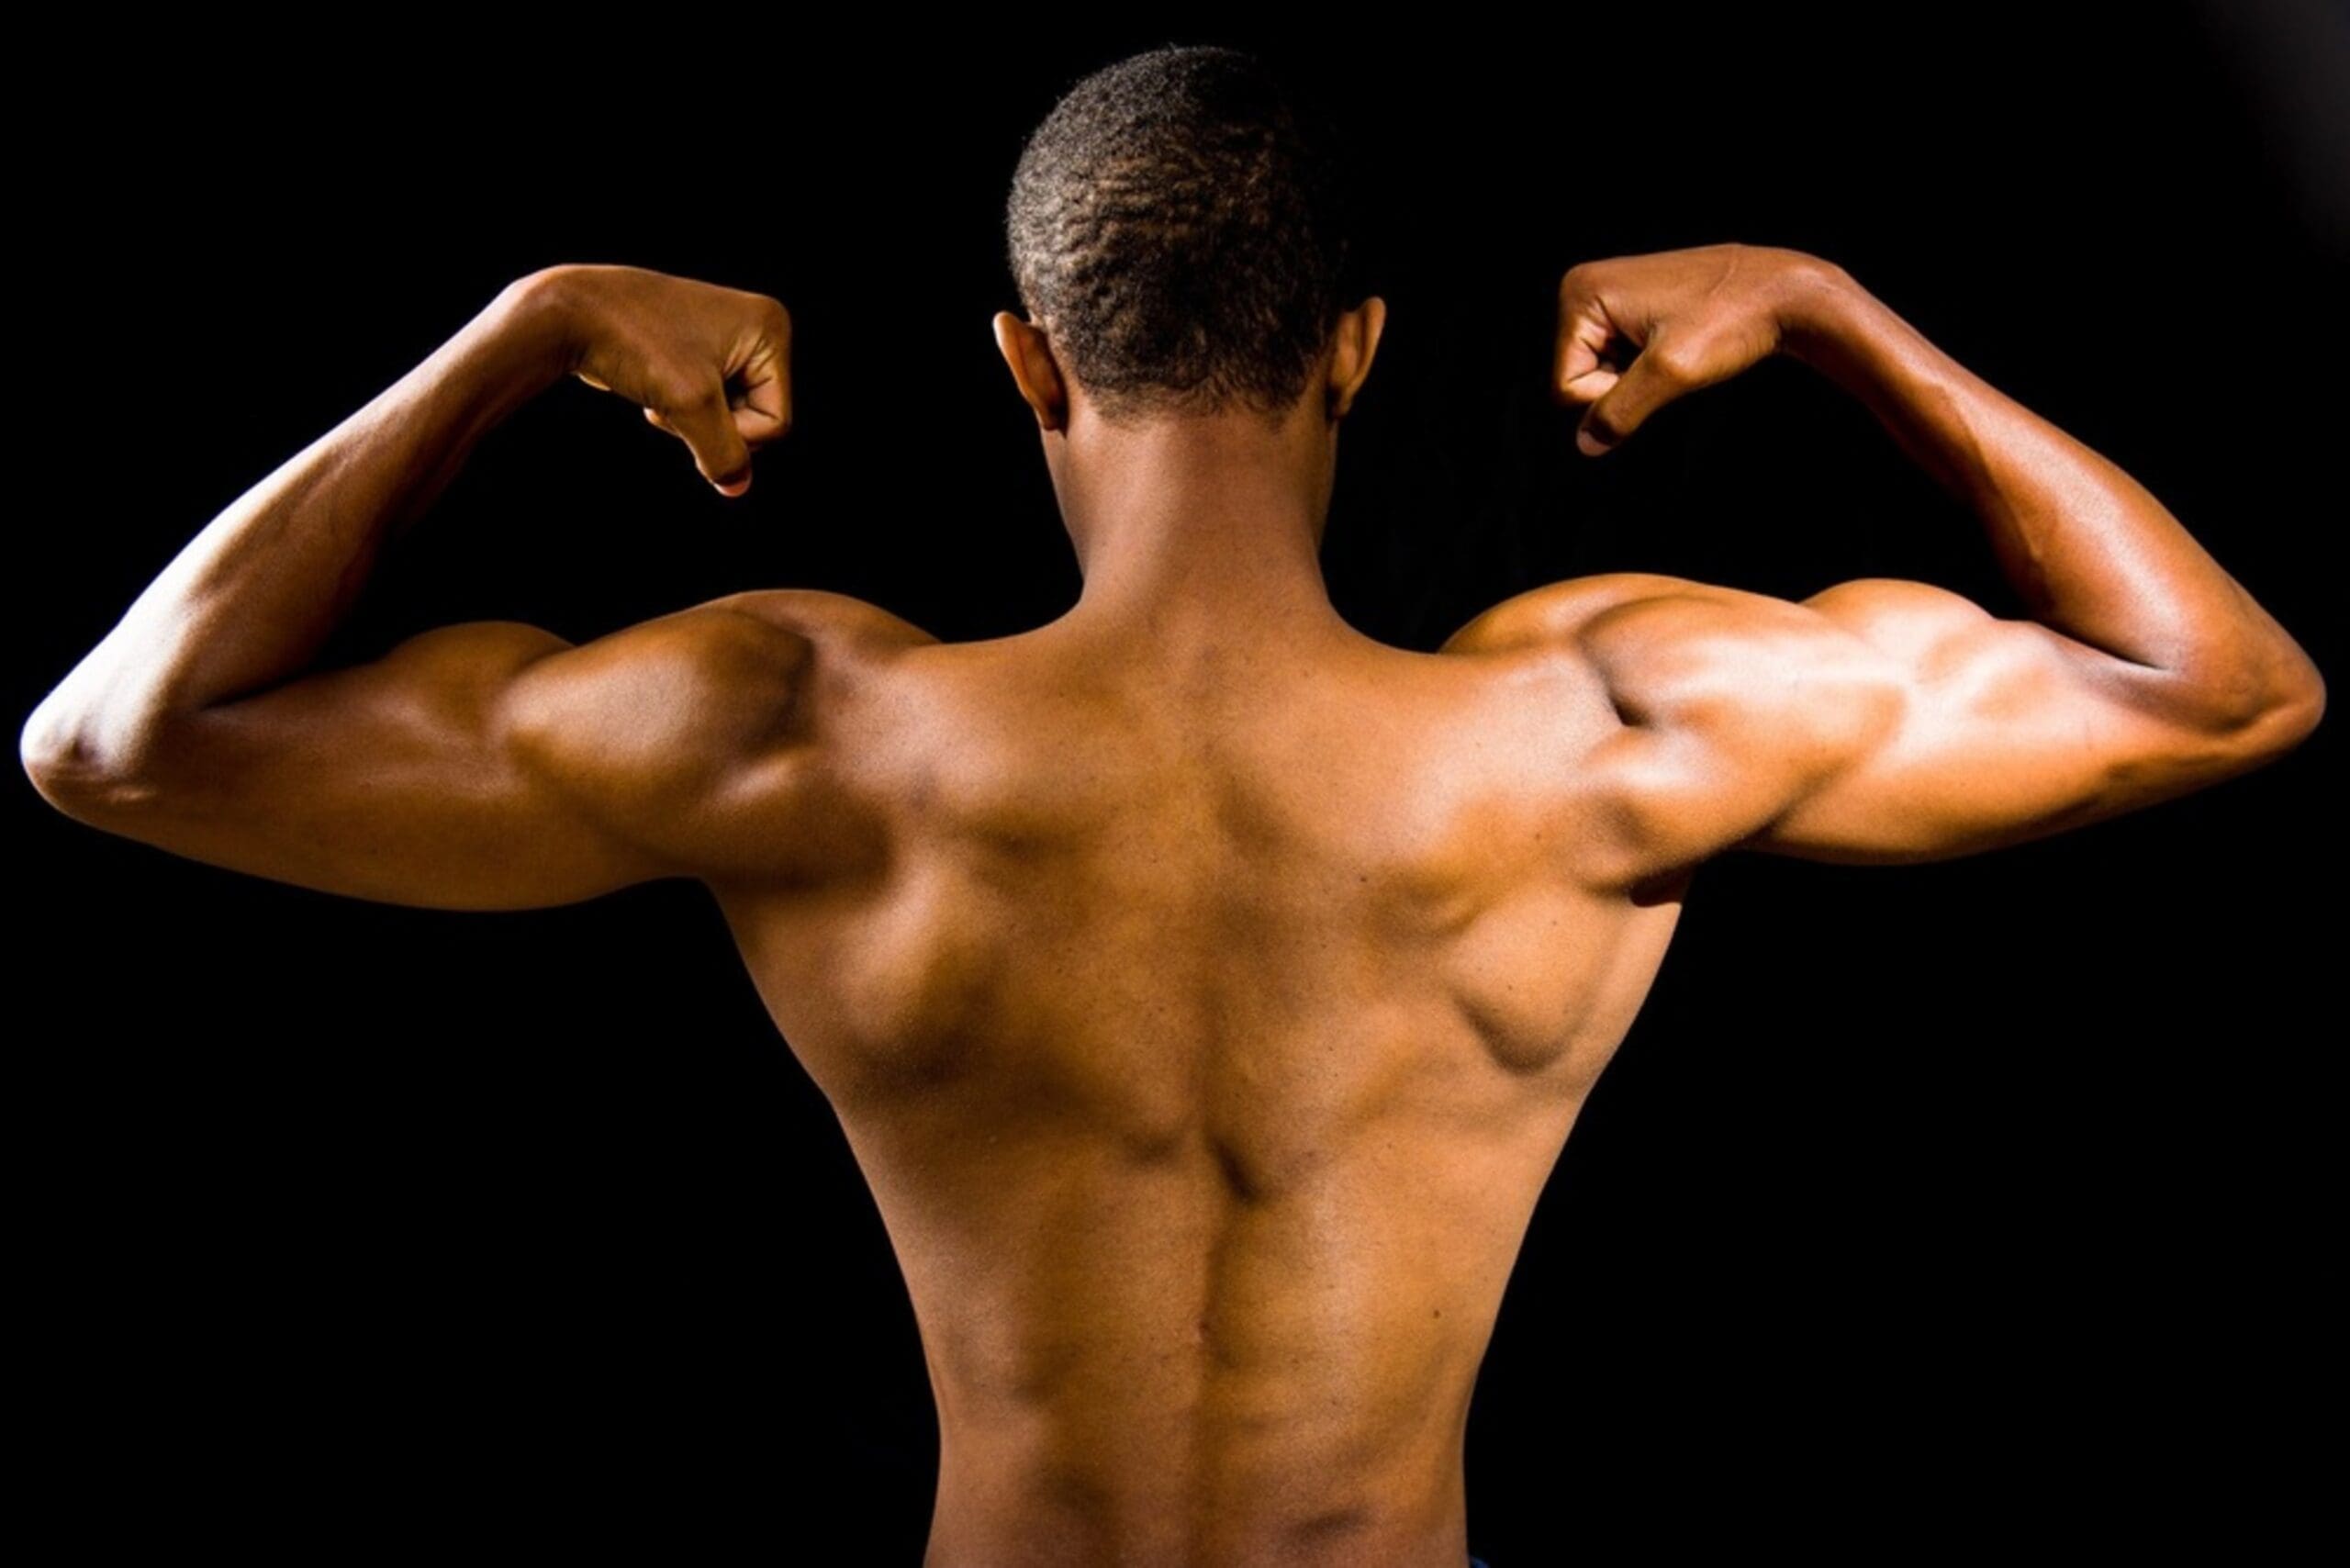 Helpful Tips On How to Build a V Shaped Back